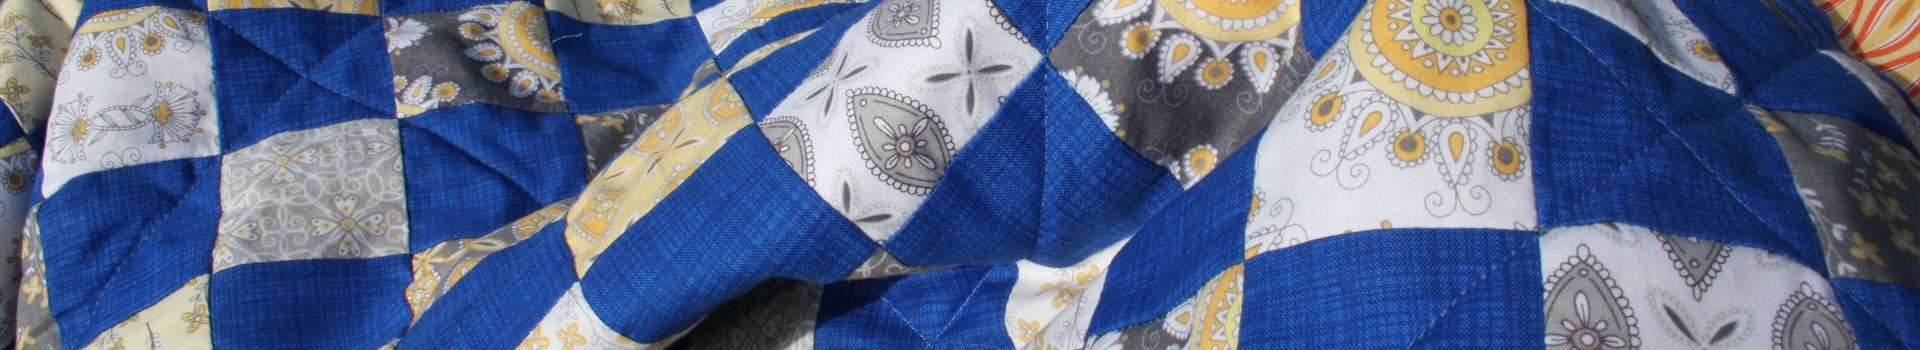 New Home Needed for Possibly Antique Crazy Quilt